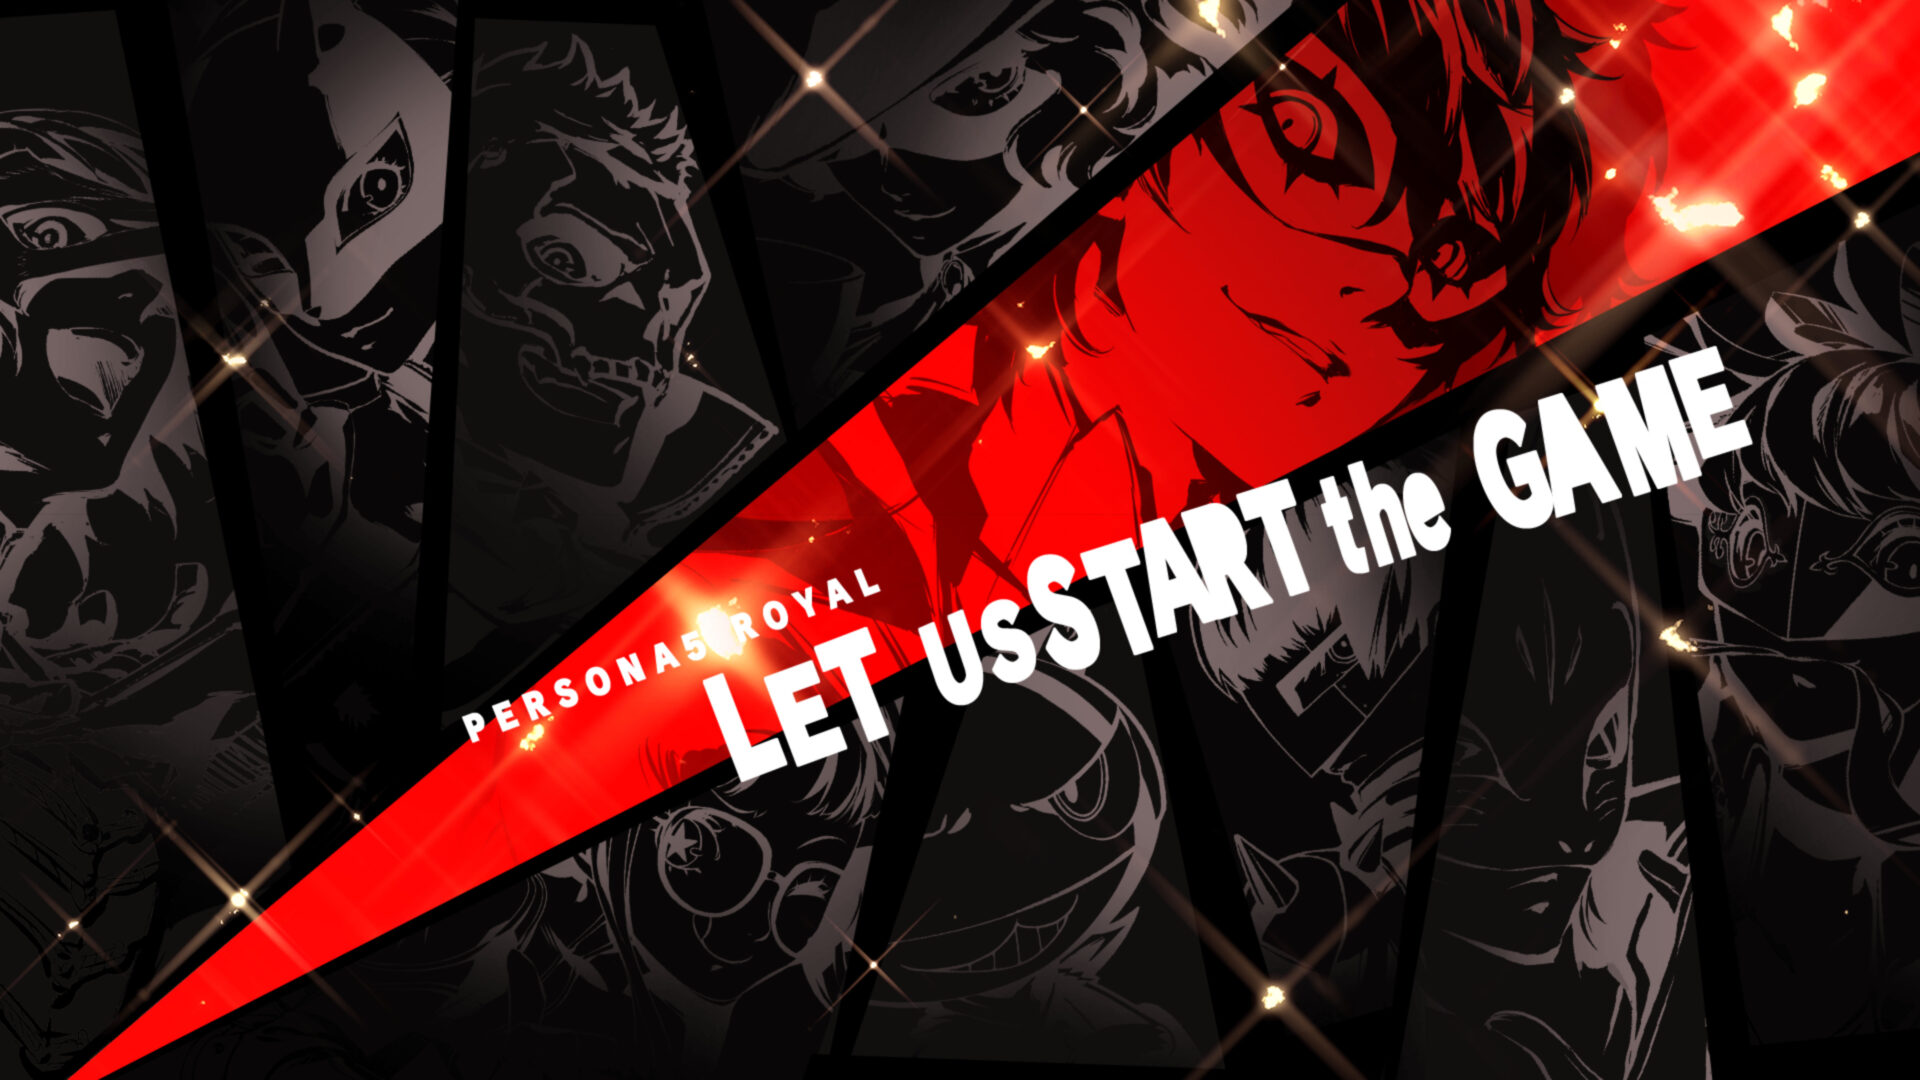 Persona 5 Royal becomes one of highest-rated PC games of all time